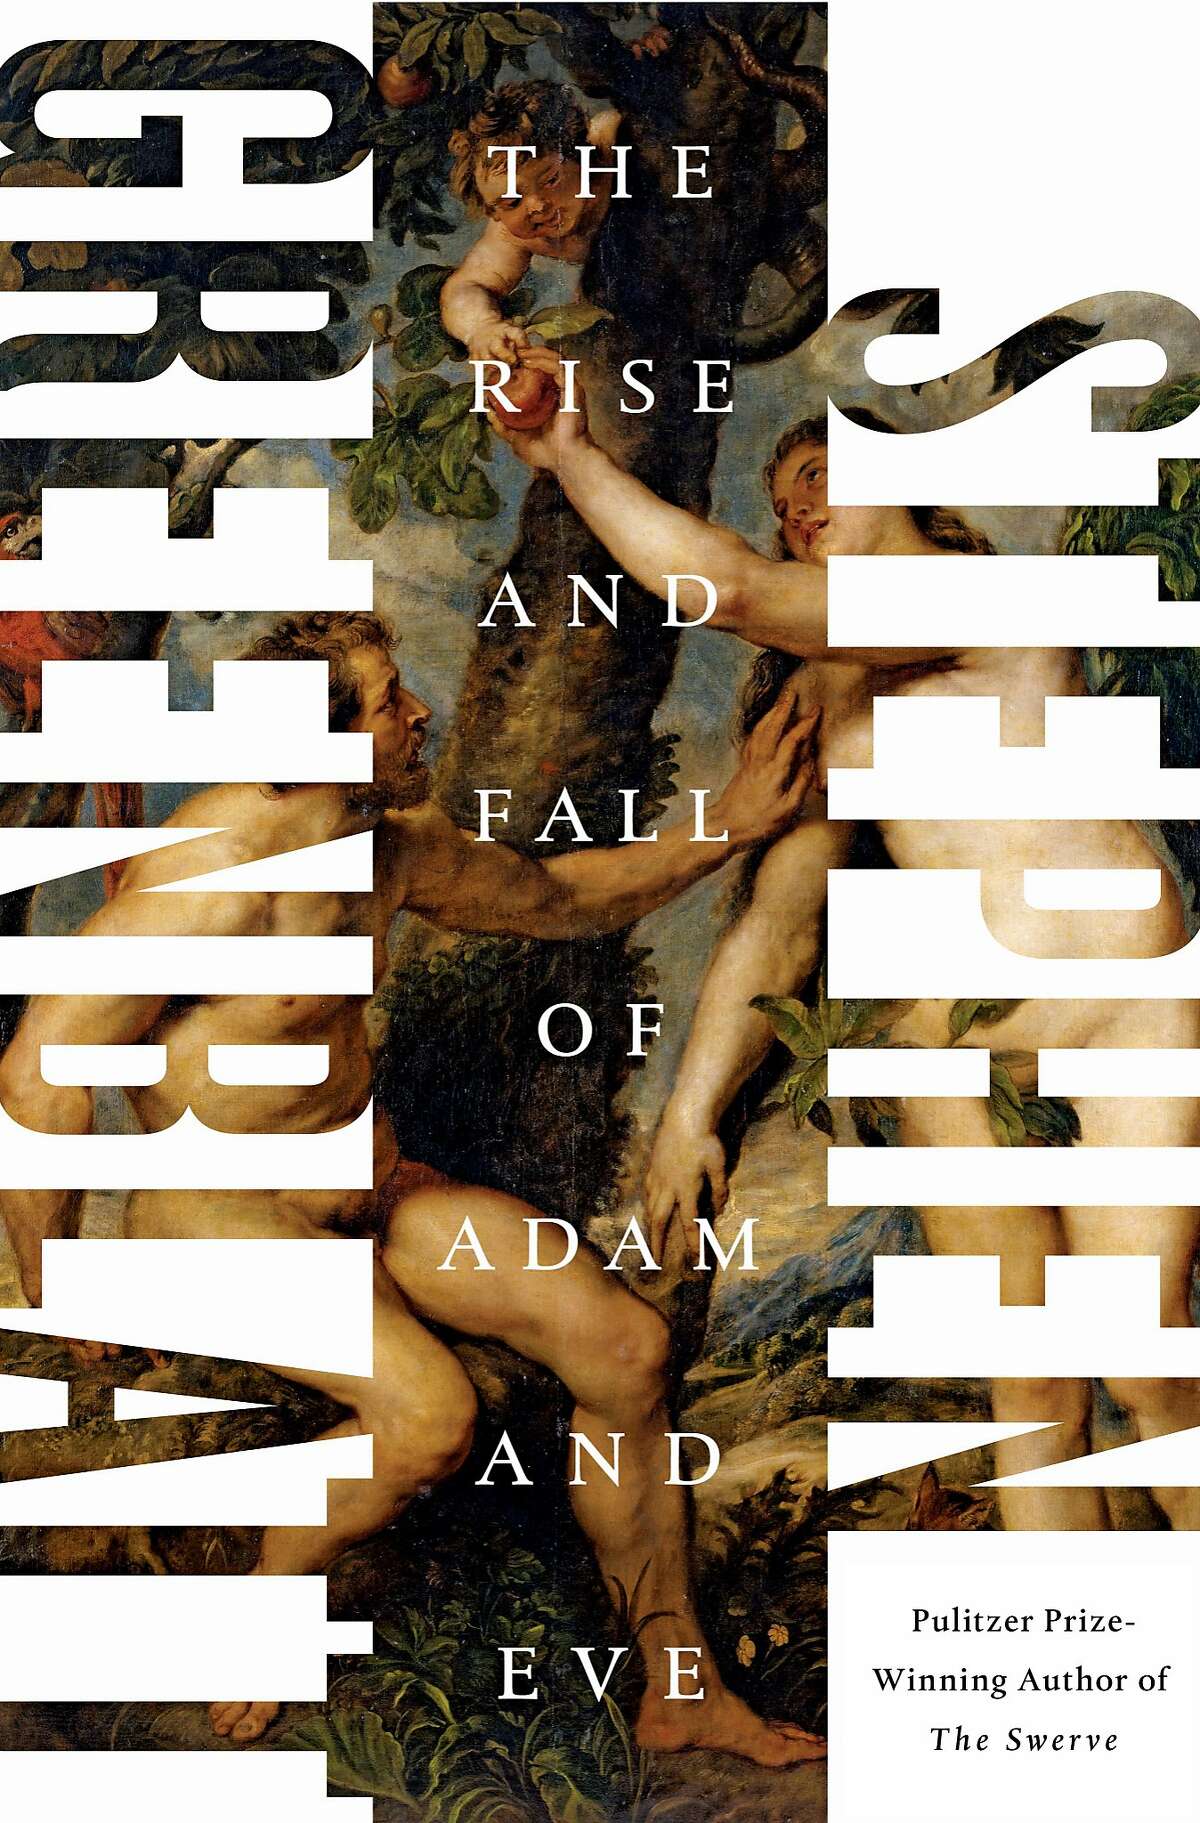 "The Rise and Fall of Adam and Eve"